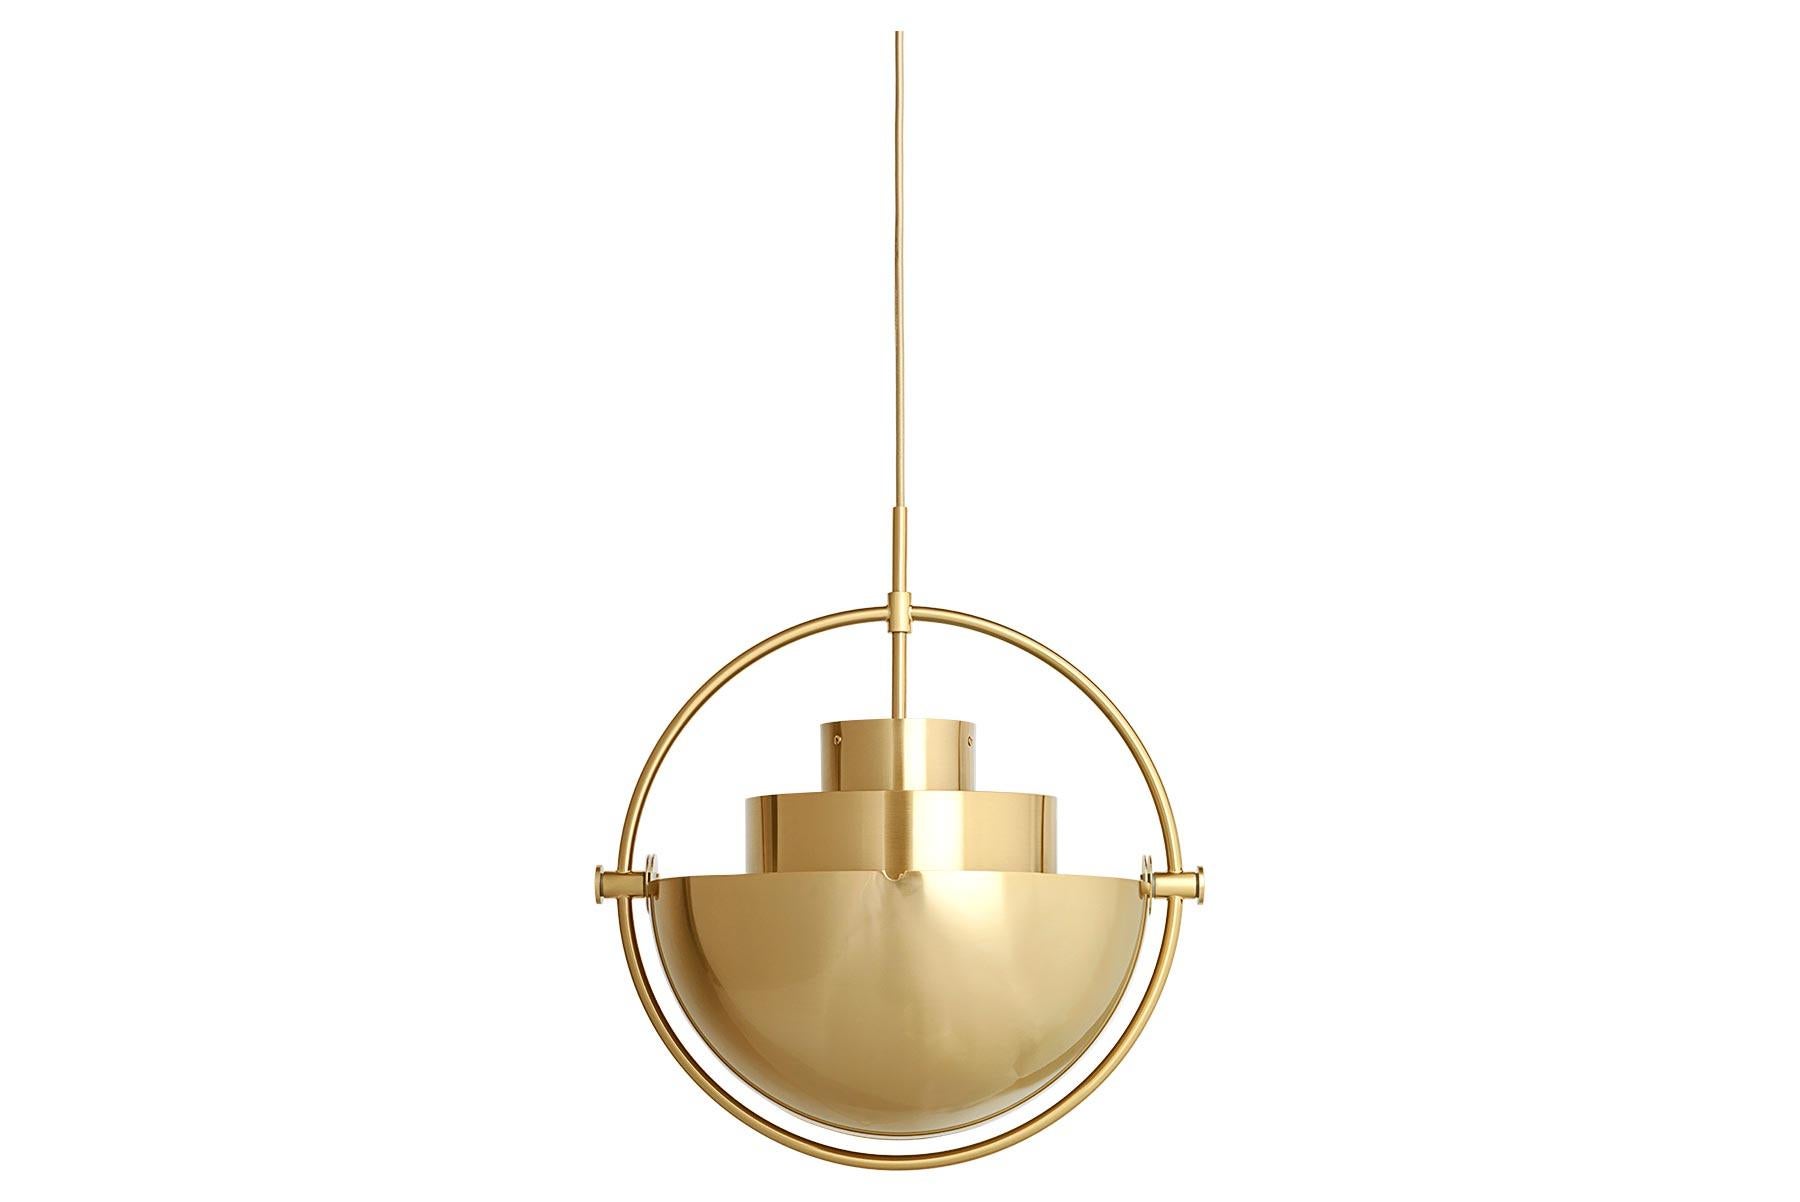 The Multi-Lite pendant embraces the golden era of Danish design with its characteristic shape of two opposing outside, mobile shades that enable creating a personal installation and a wide range of lighting values in a room. By individually rotating